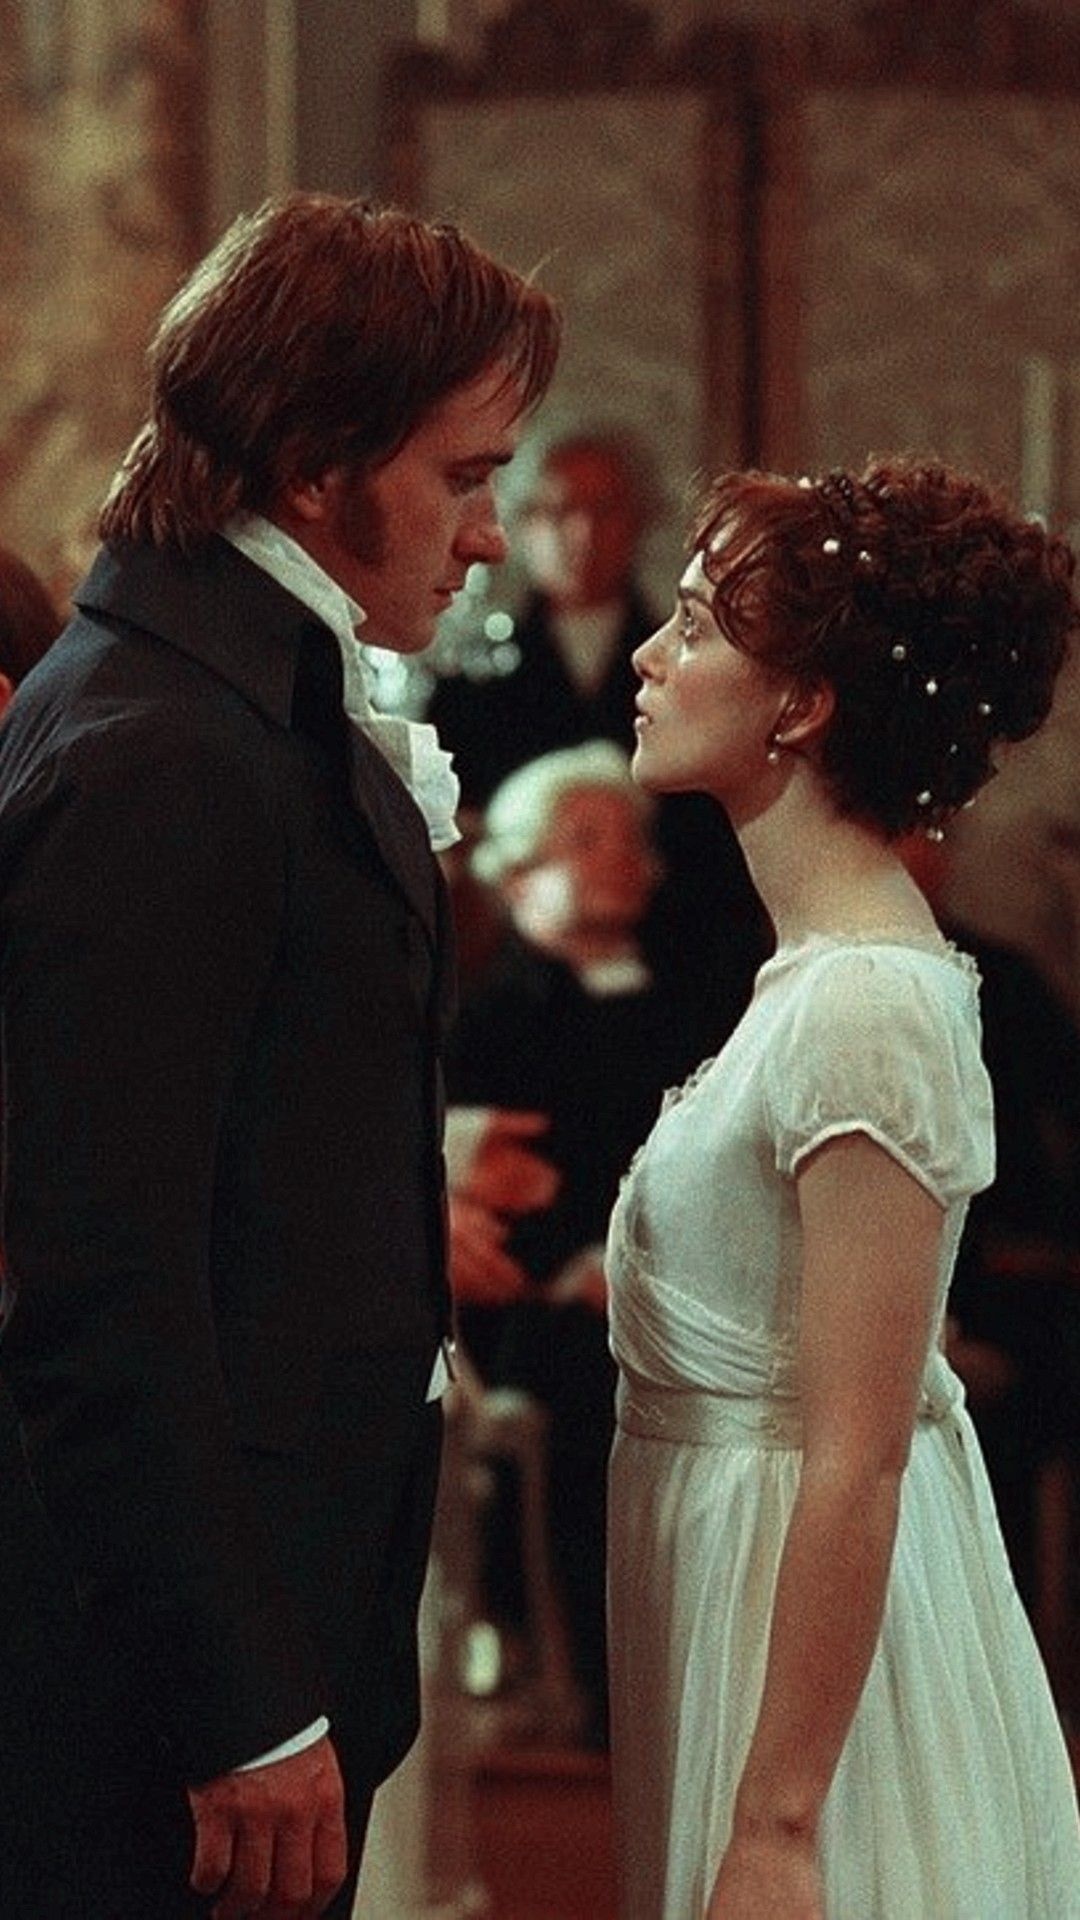 Pride and Prejudice: Received Best British Film award at the 2005 Empire Awards. 1080x1920 Full HD Background.